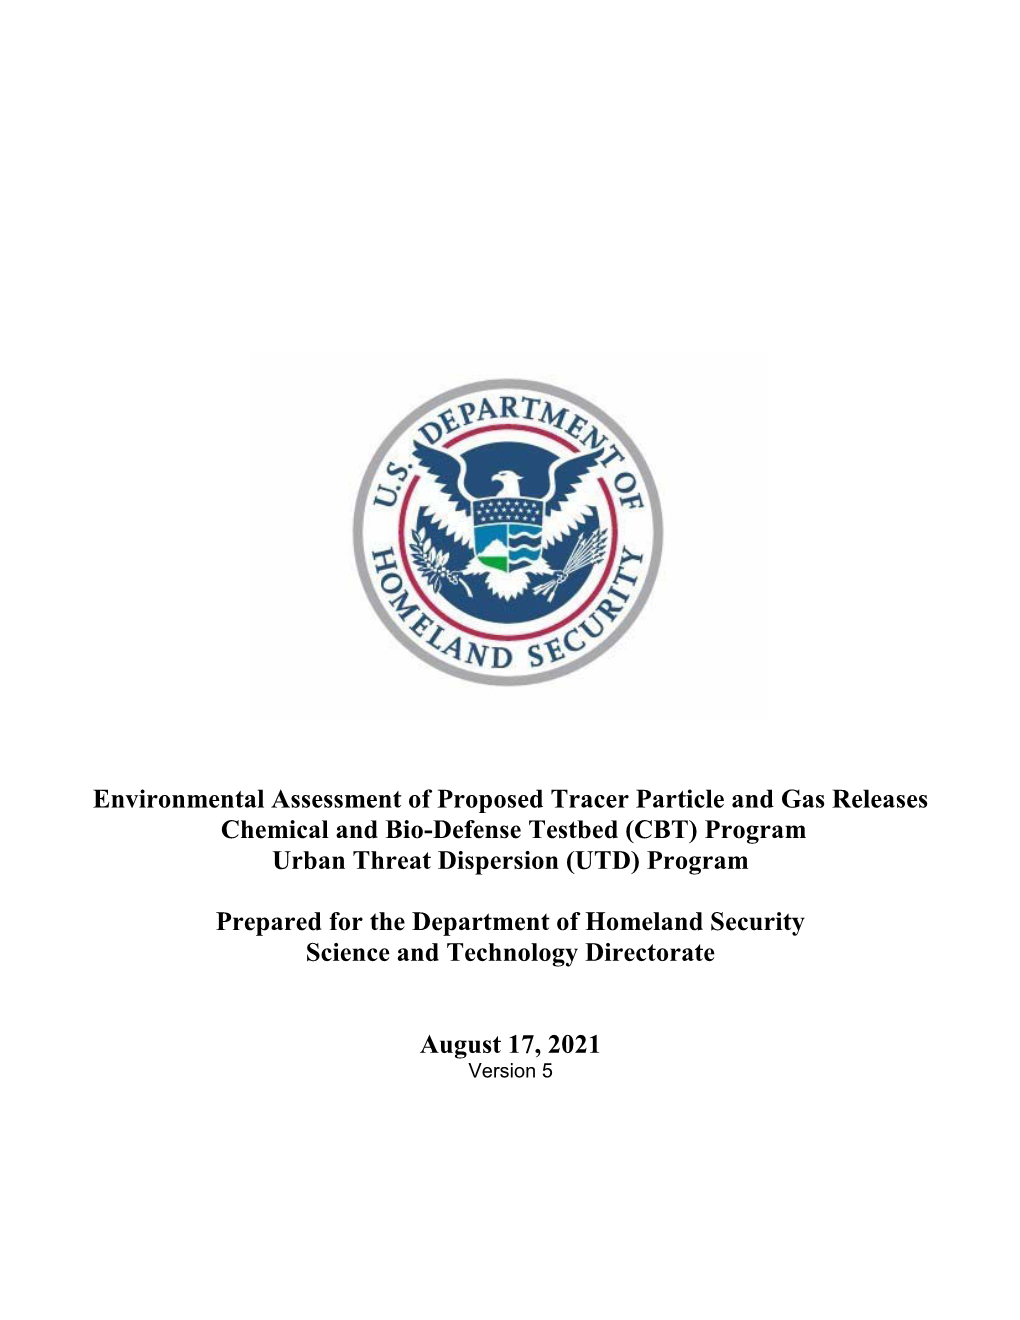 Environmental Assessment of Proposed Tracer Particle and Gas Releases Chemical and Bio-Defense Testbed (CBT) Program Urban Threat Dispersion (UTD) Program